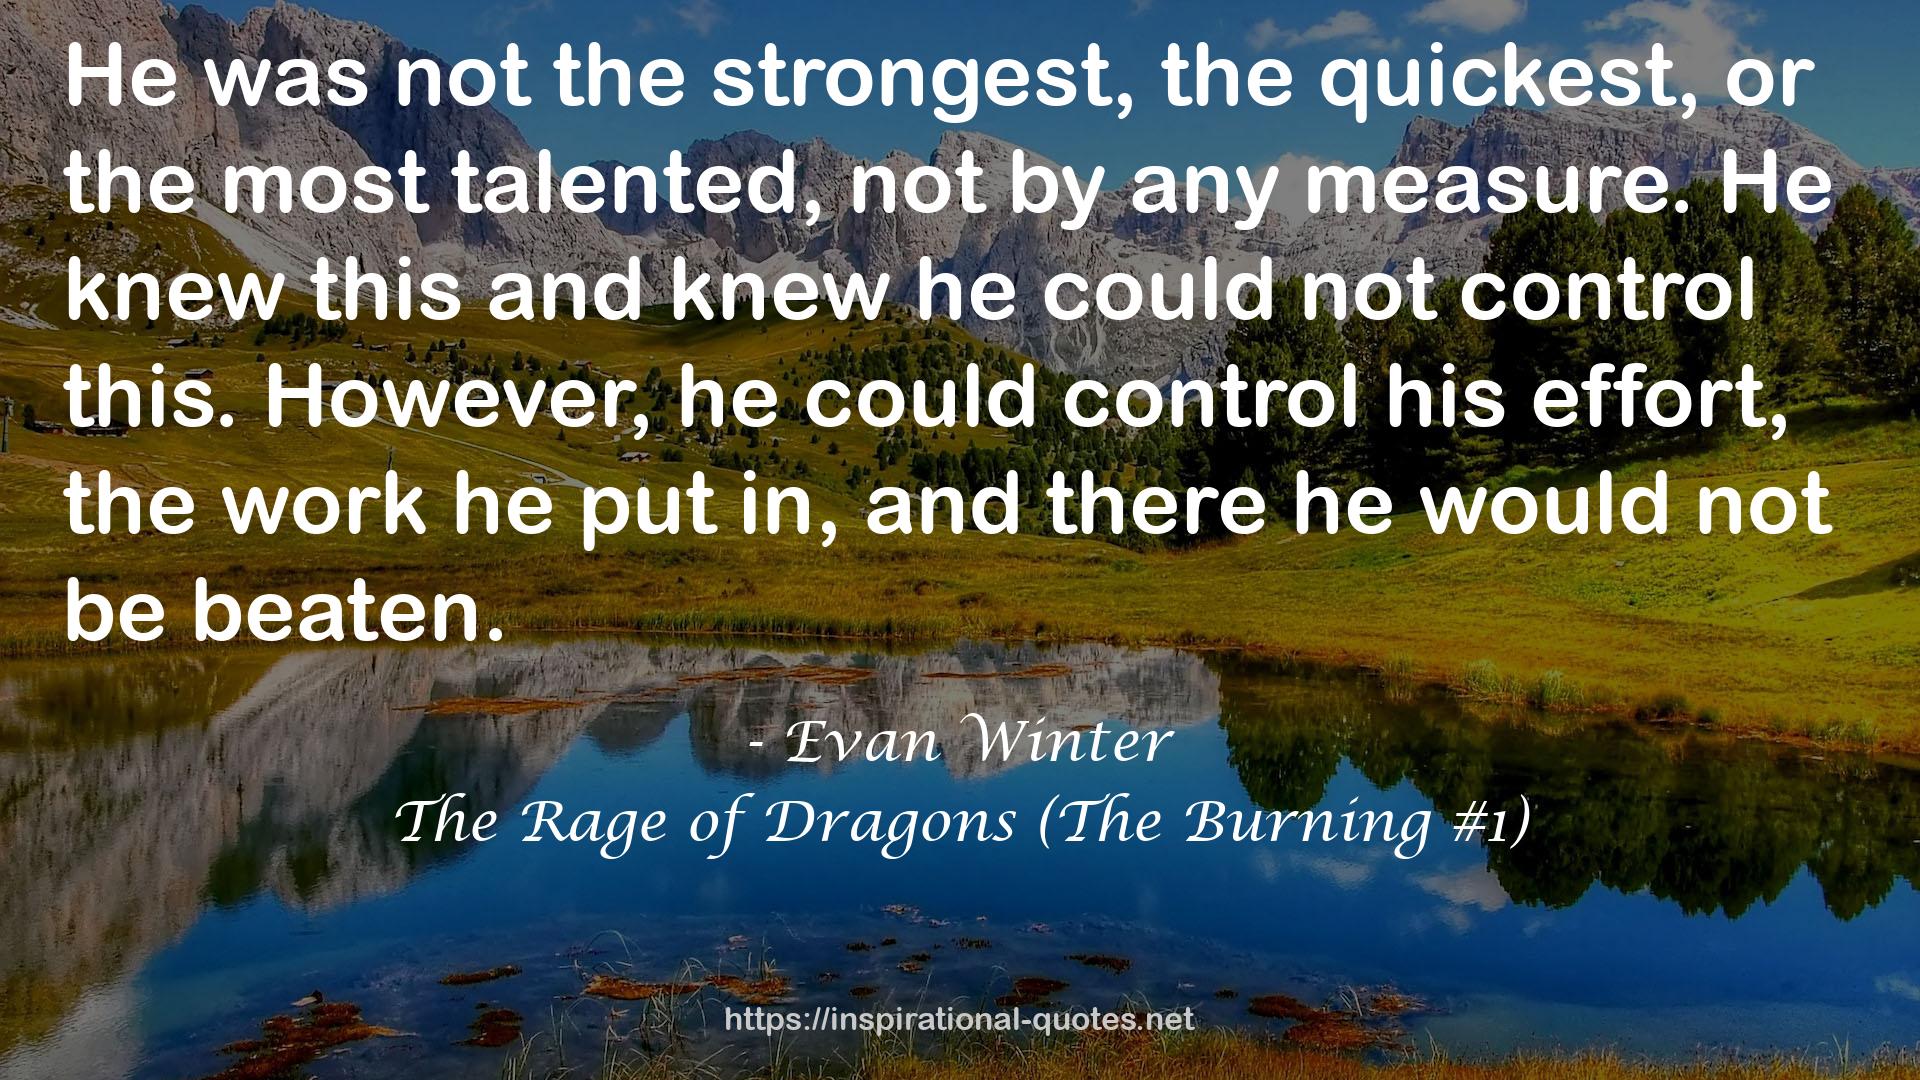 The Rage of Dragons (The Burning #1) QUOTES